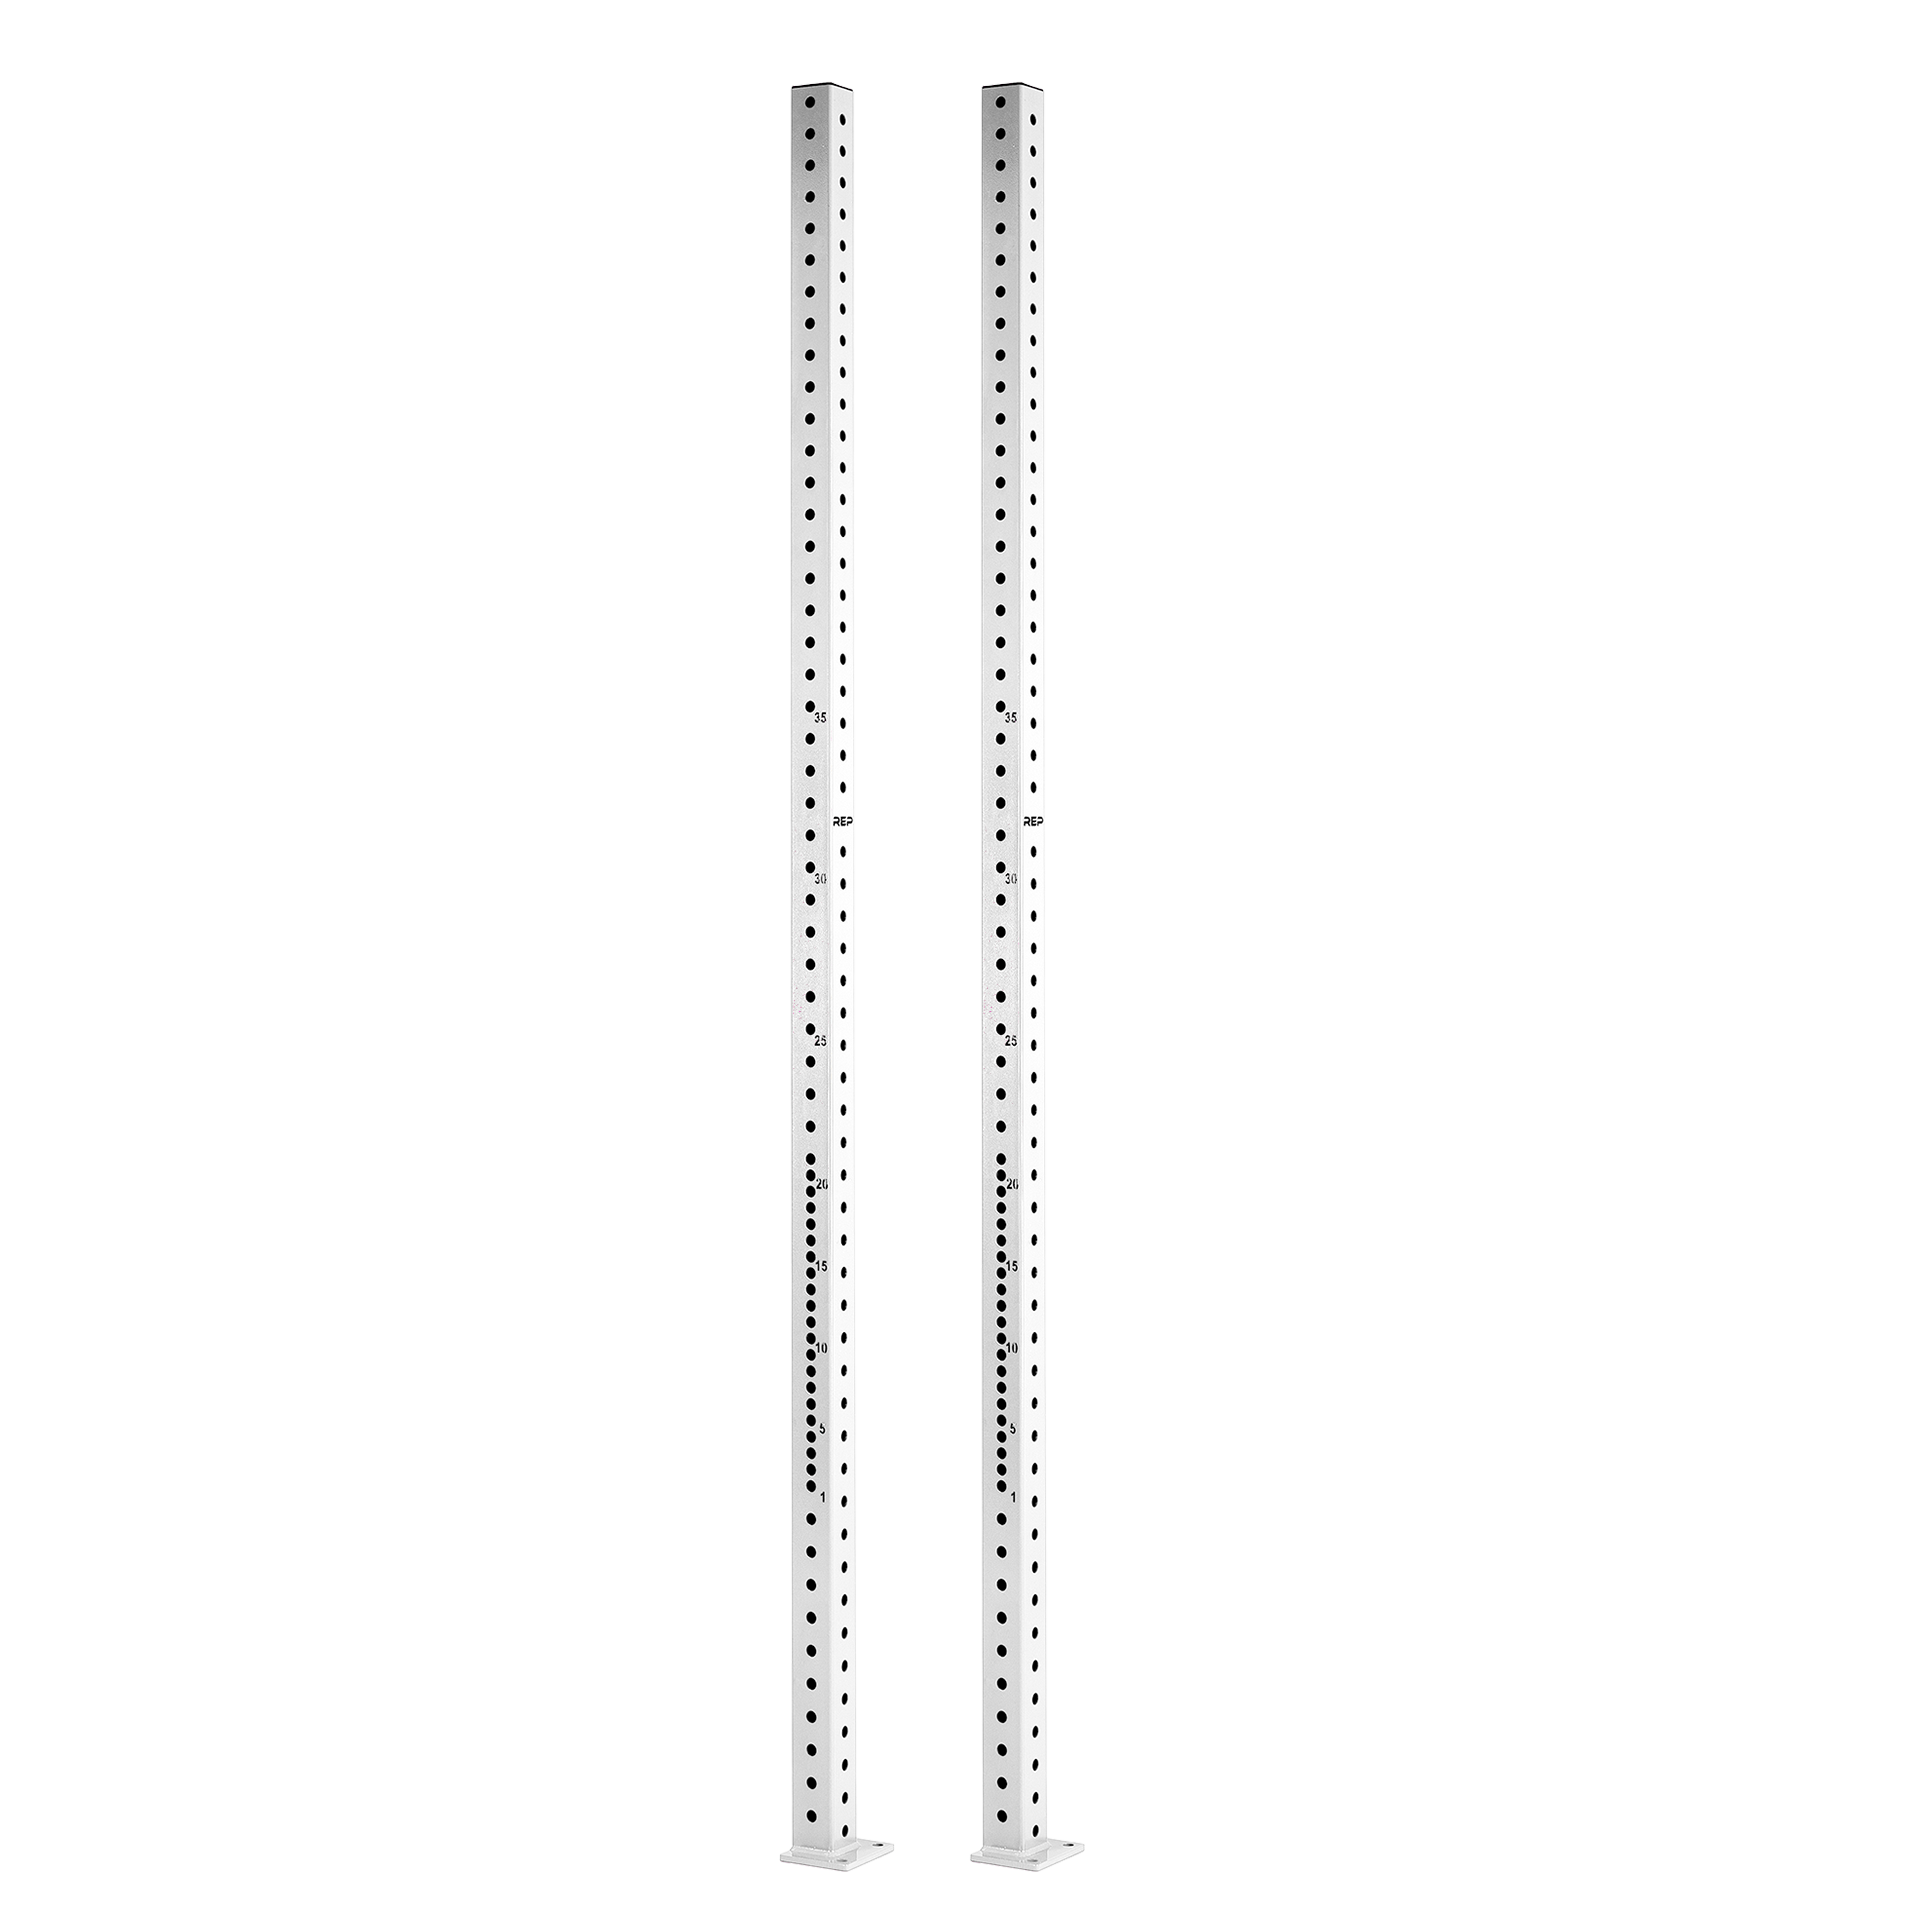 Rig Uprights - 4000 / Pair / White